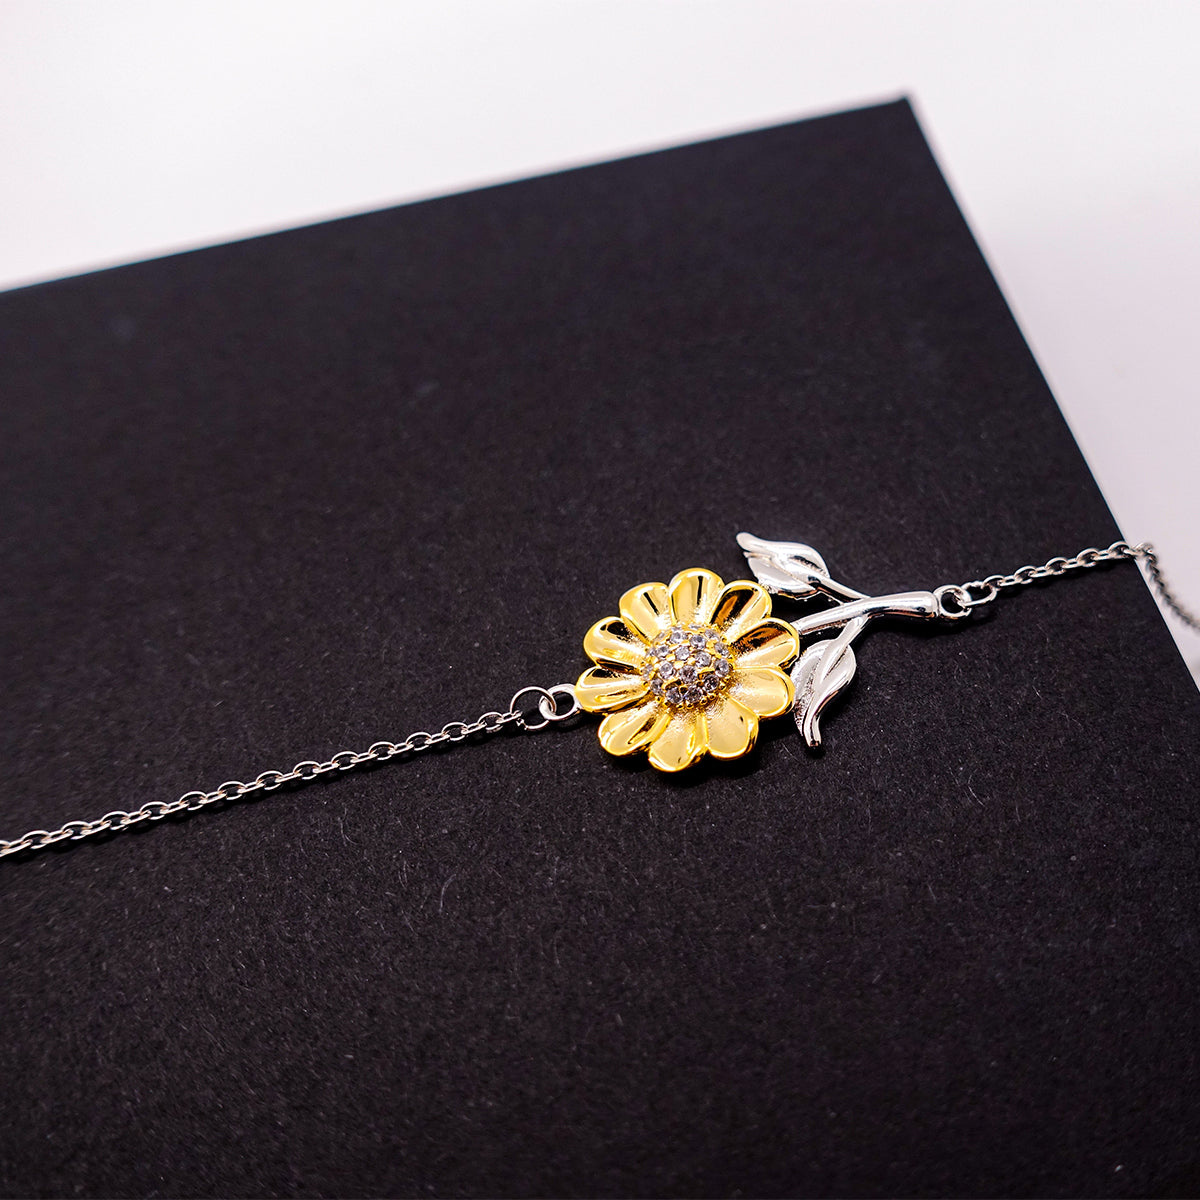 To My Amazing Granddaughter Supporting Sunflower Bracelet, Life is an adventure waiting to be explored, Birthday Unique Gifts for Granddaughter from Gramps